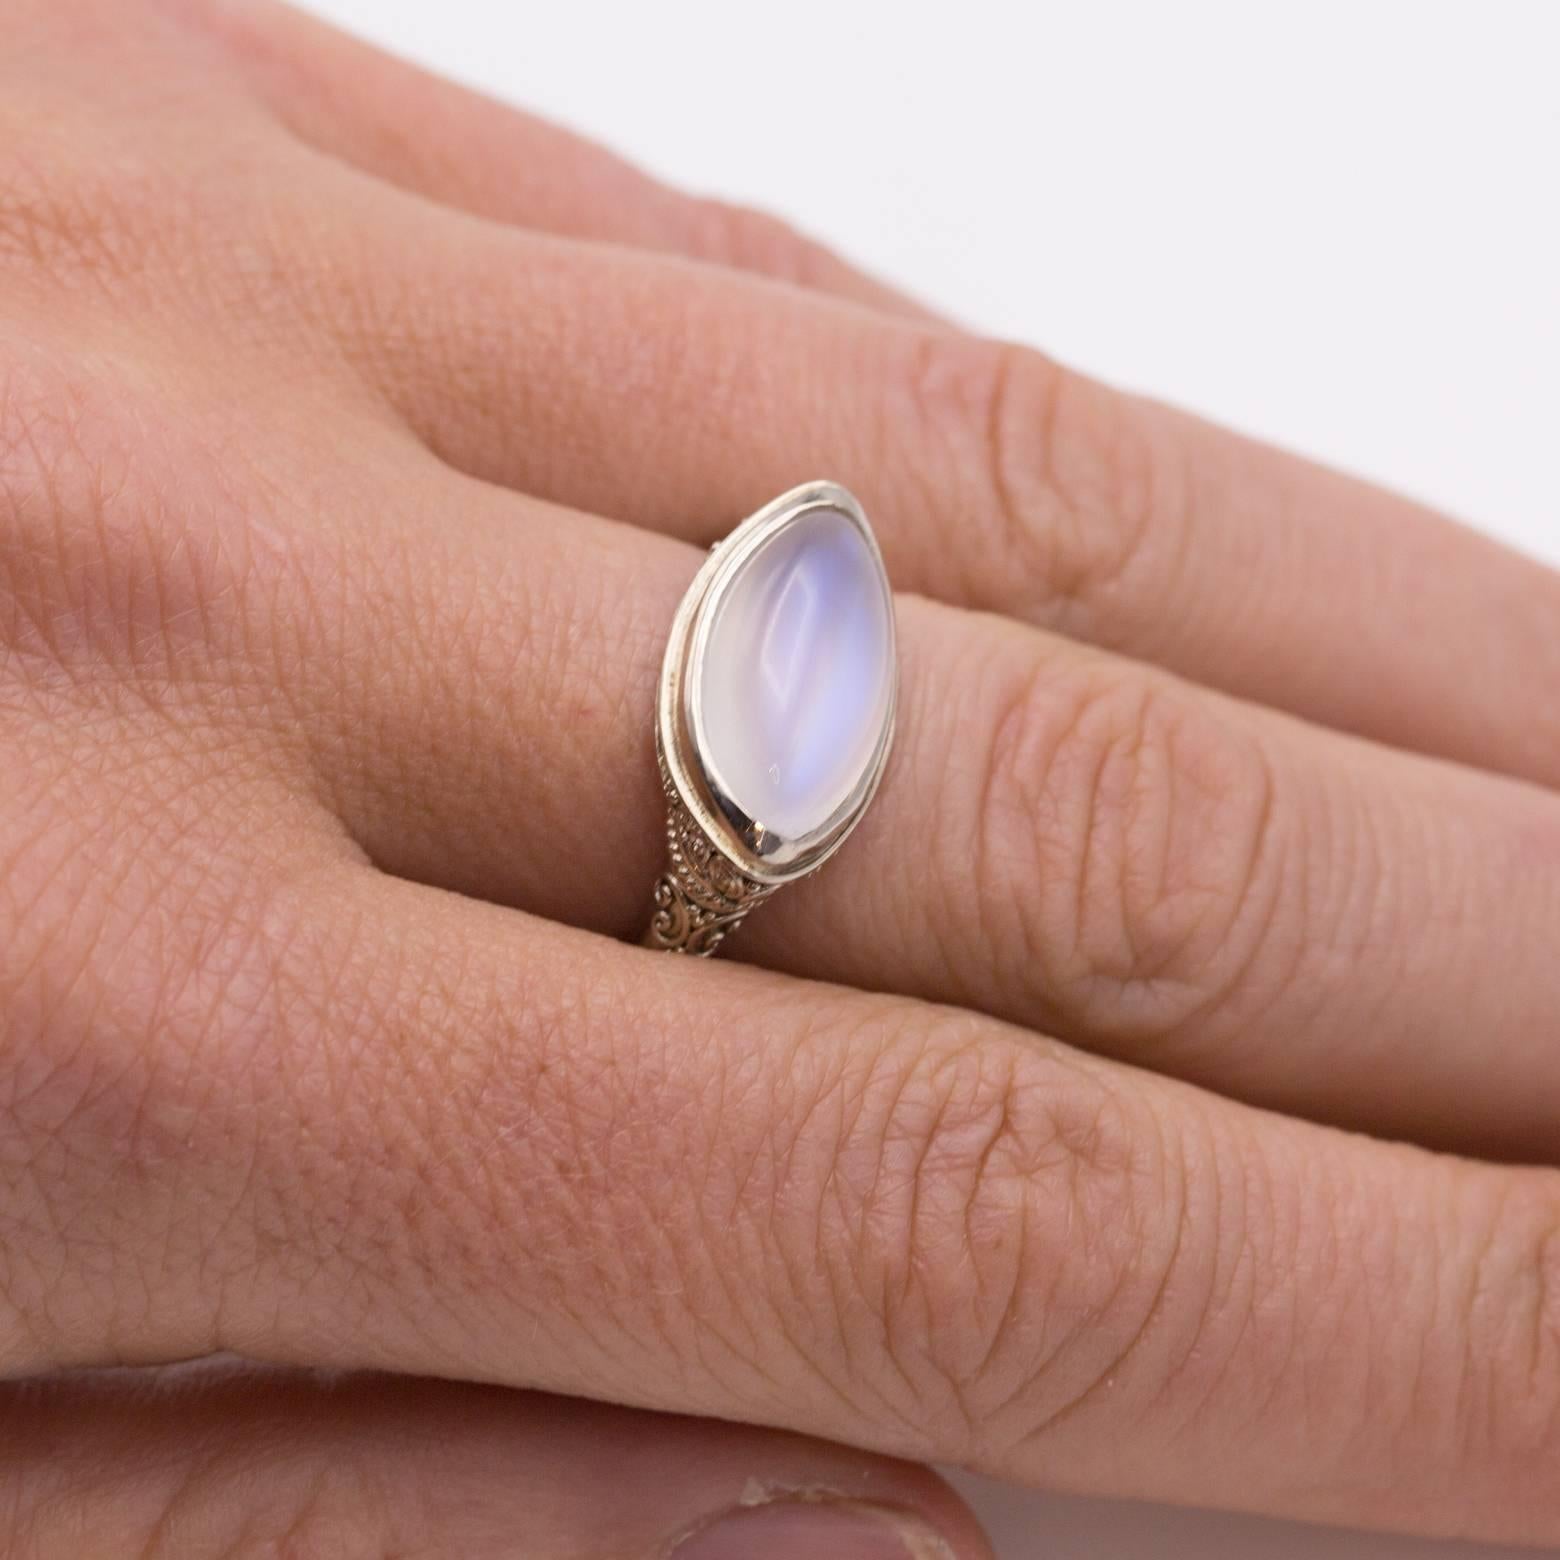 Intricate detail and a beautiful granular setting holds in this flawless marquise moonstone. The clarity almost looks as if it were a star sapphire but with the brightness of a white moonstone. Fashionable with the light blue/purple glow